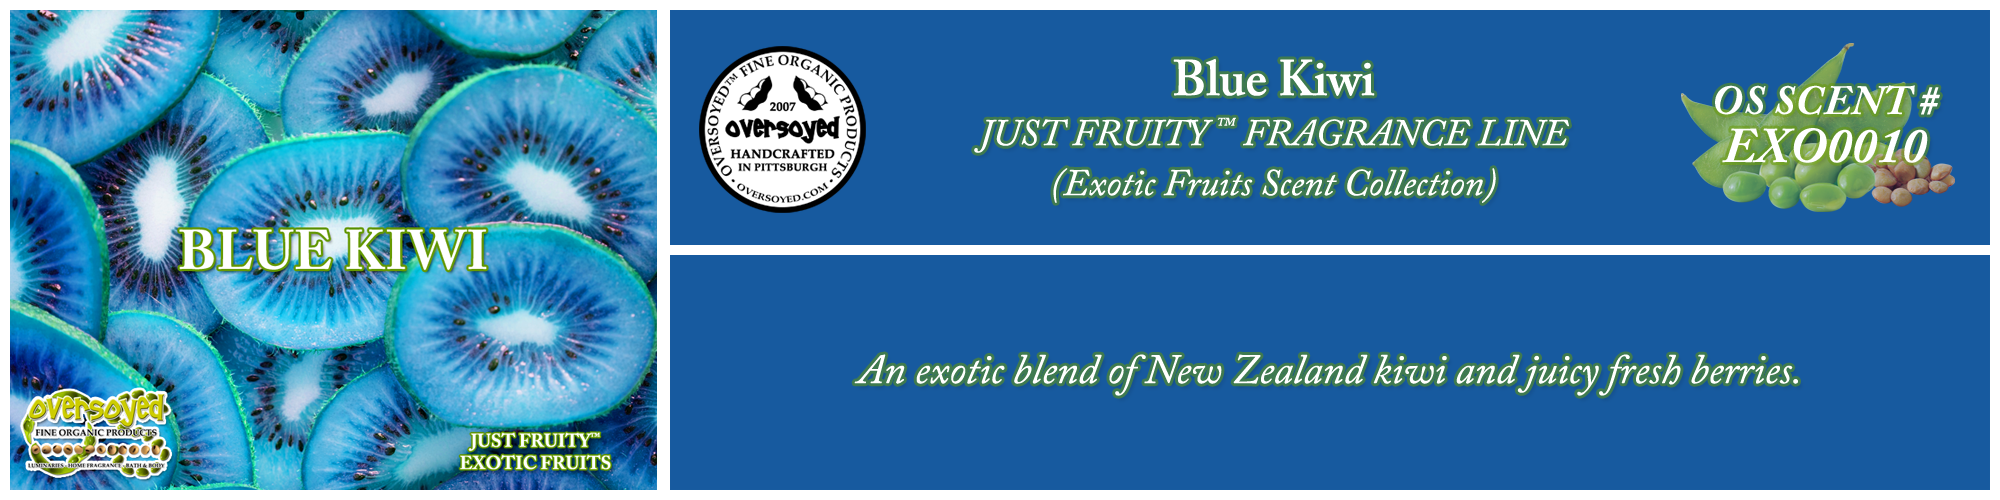 Blue Kiwi Handcrafted Products Collection